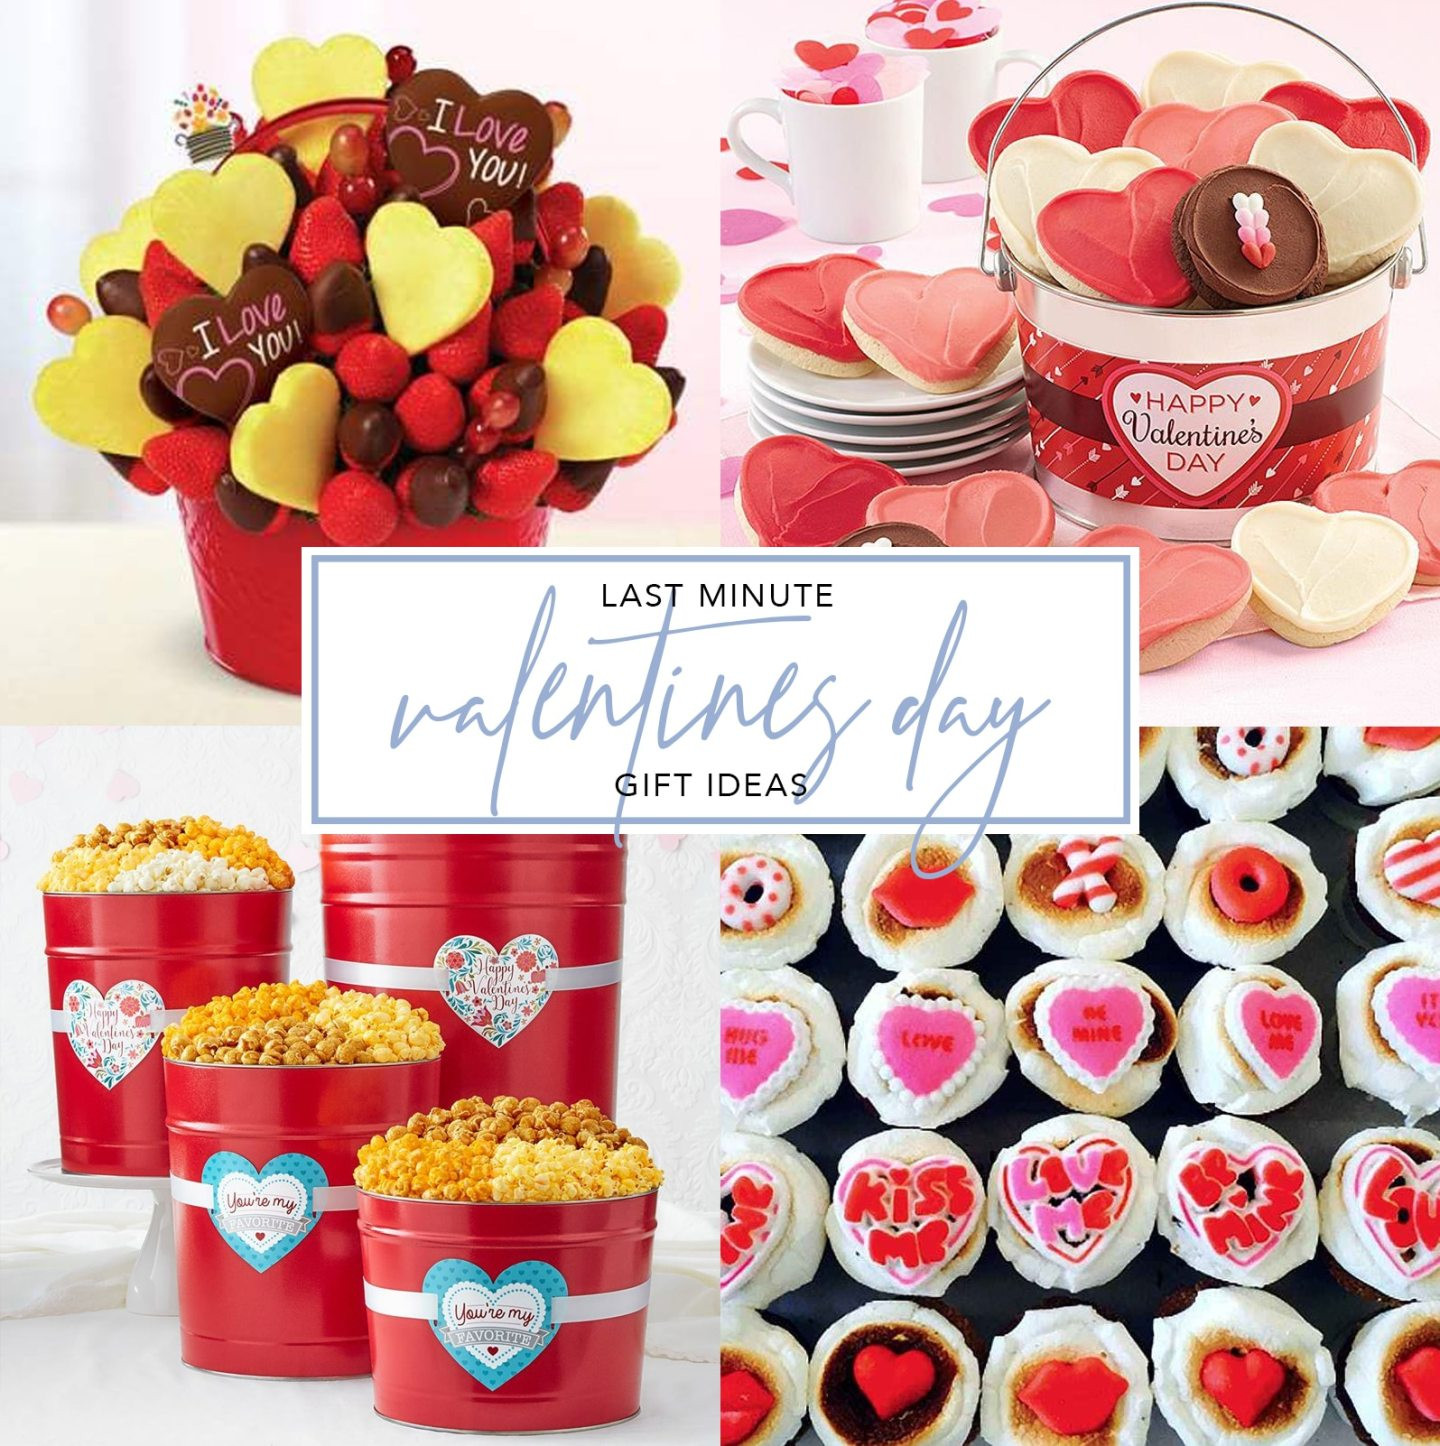 Last Minute Valentines Gift Ideas
 Send Some Love Last Minute Valentine s Day Gift Ideas